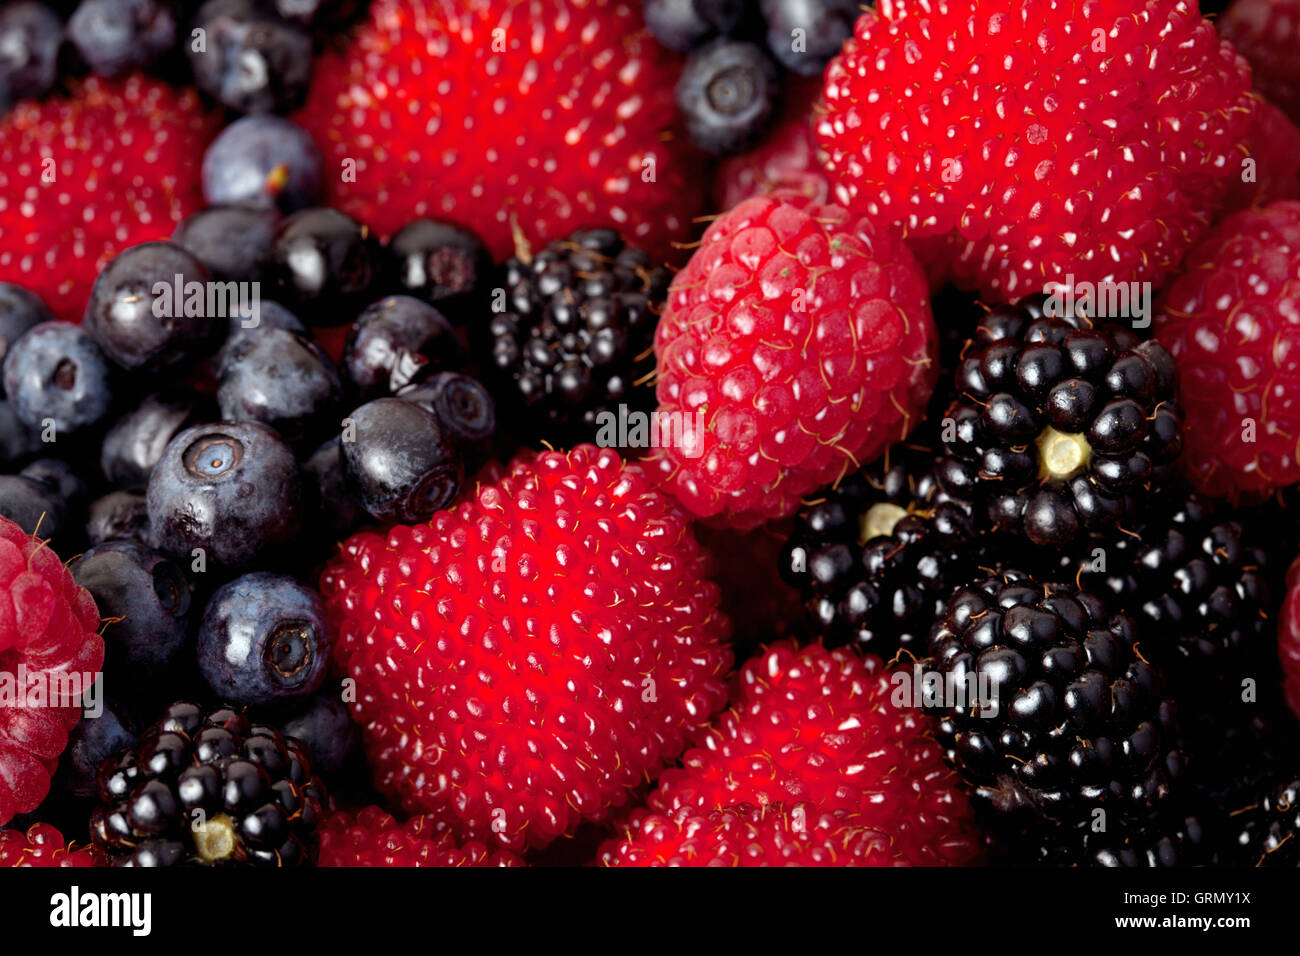 Assorted berries: raspberry,blackberry and blueberry - background image. Stock Photo